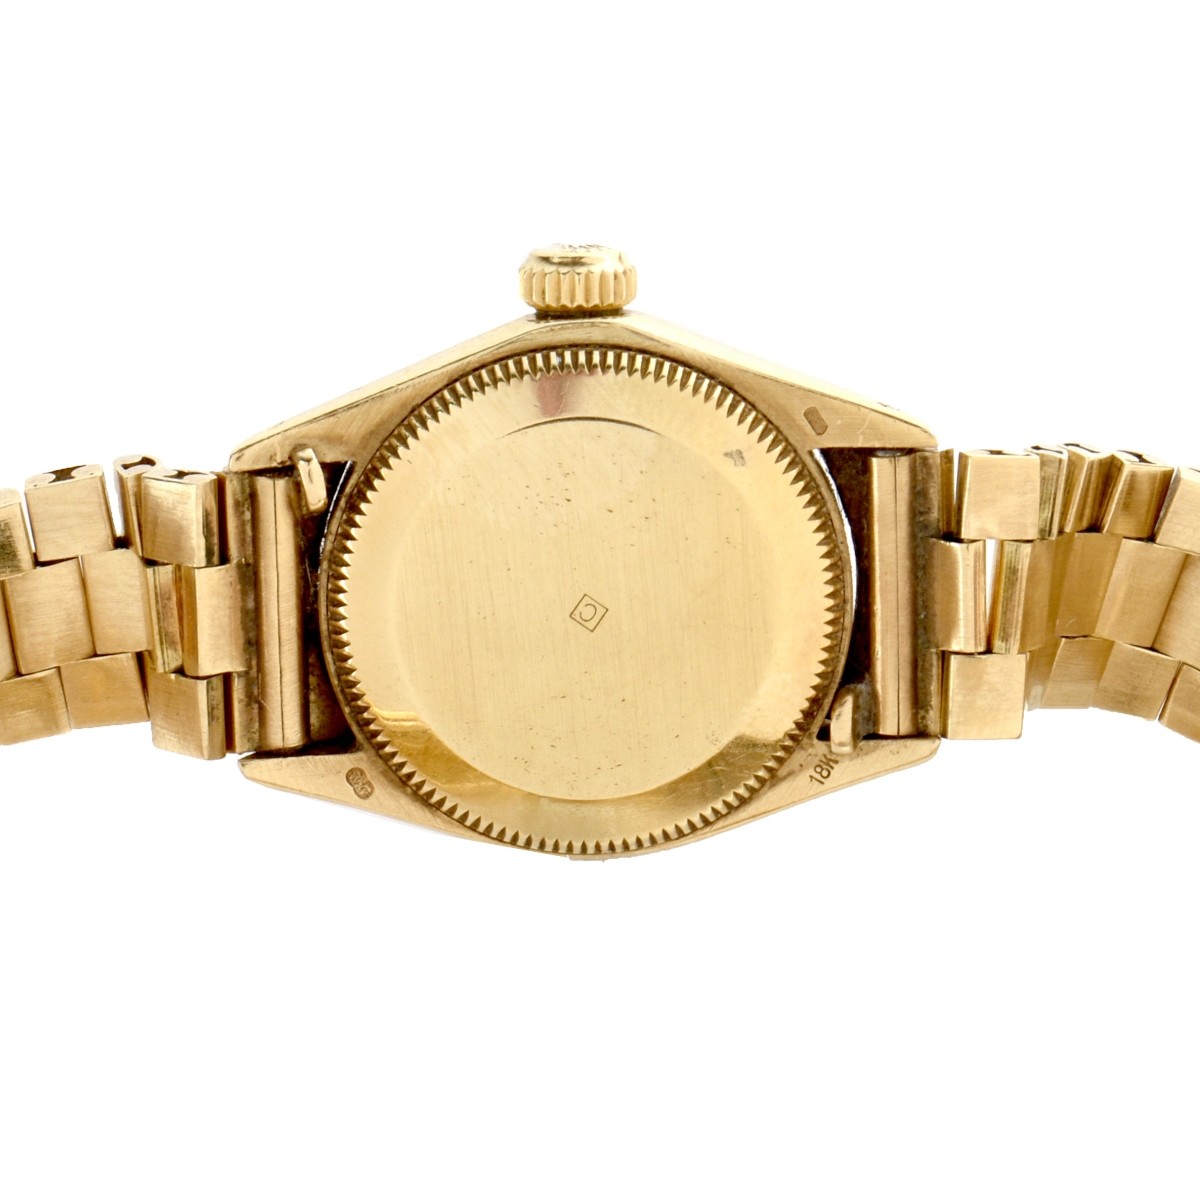 Rolex Oyster Perpetual 18K Watch